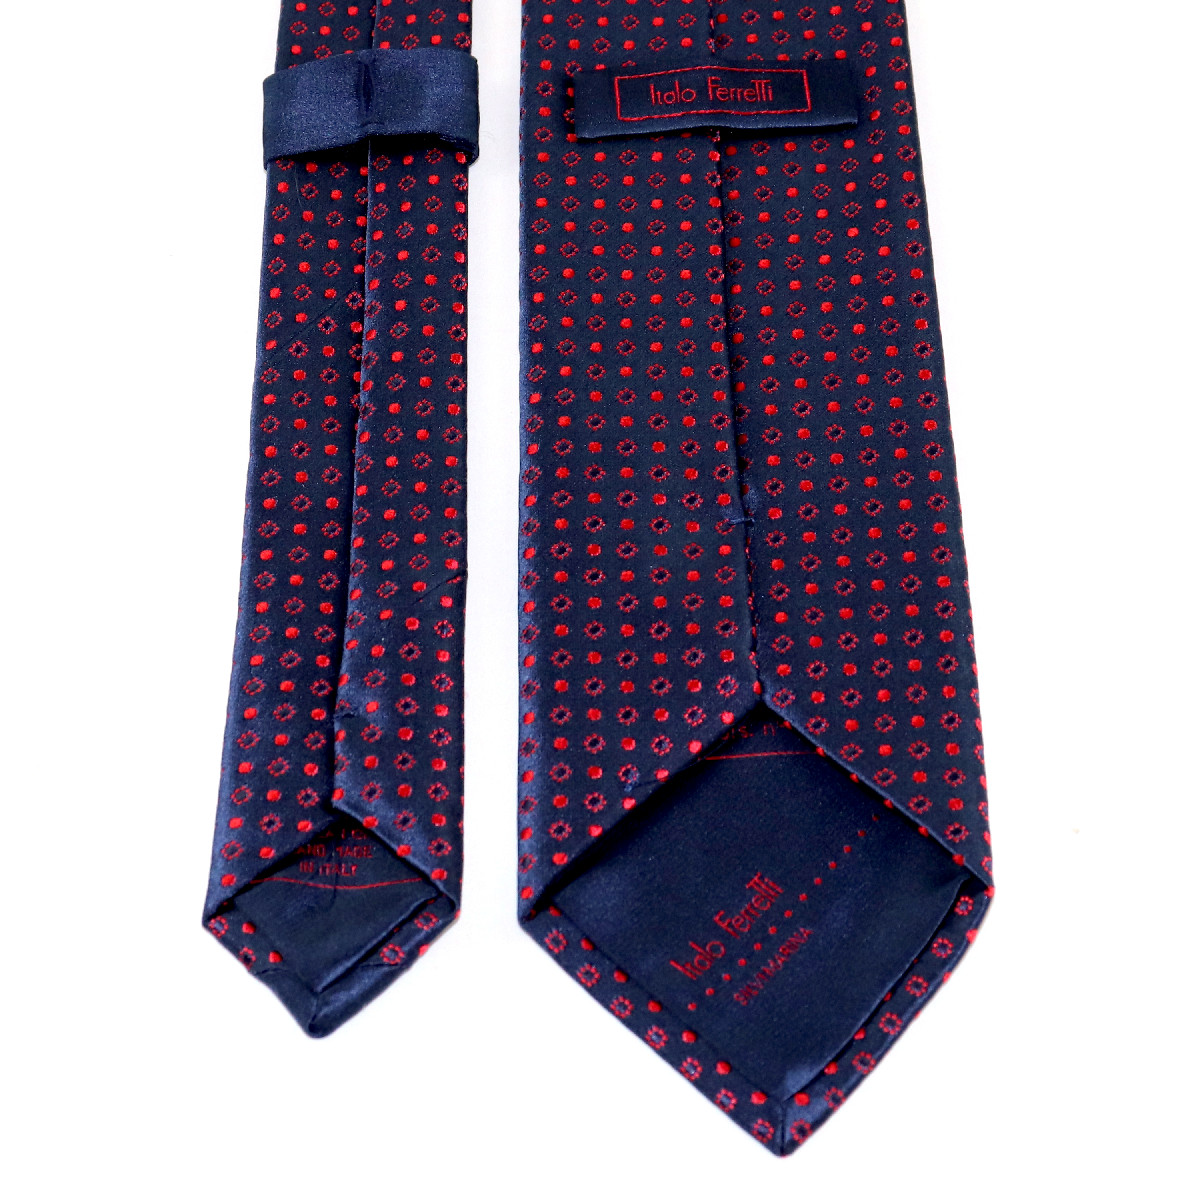 Classy business look tie, navy blue background and red micropattern ...